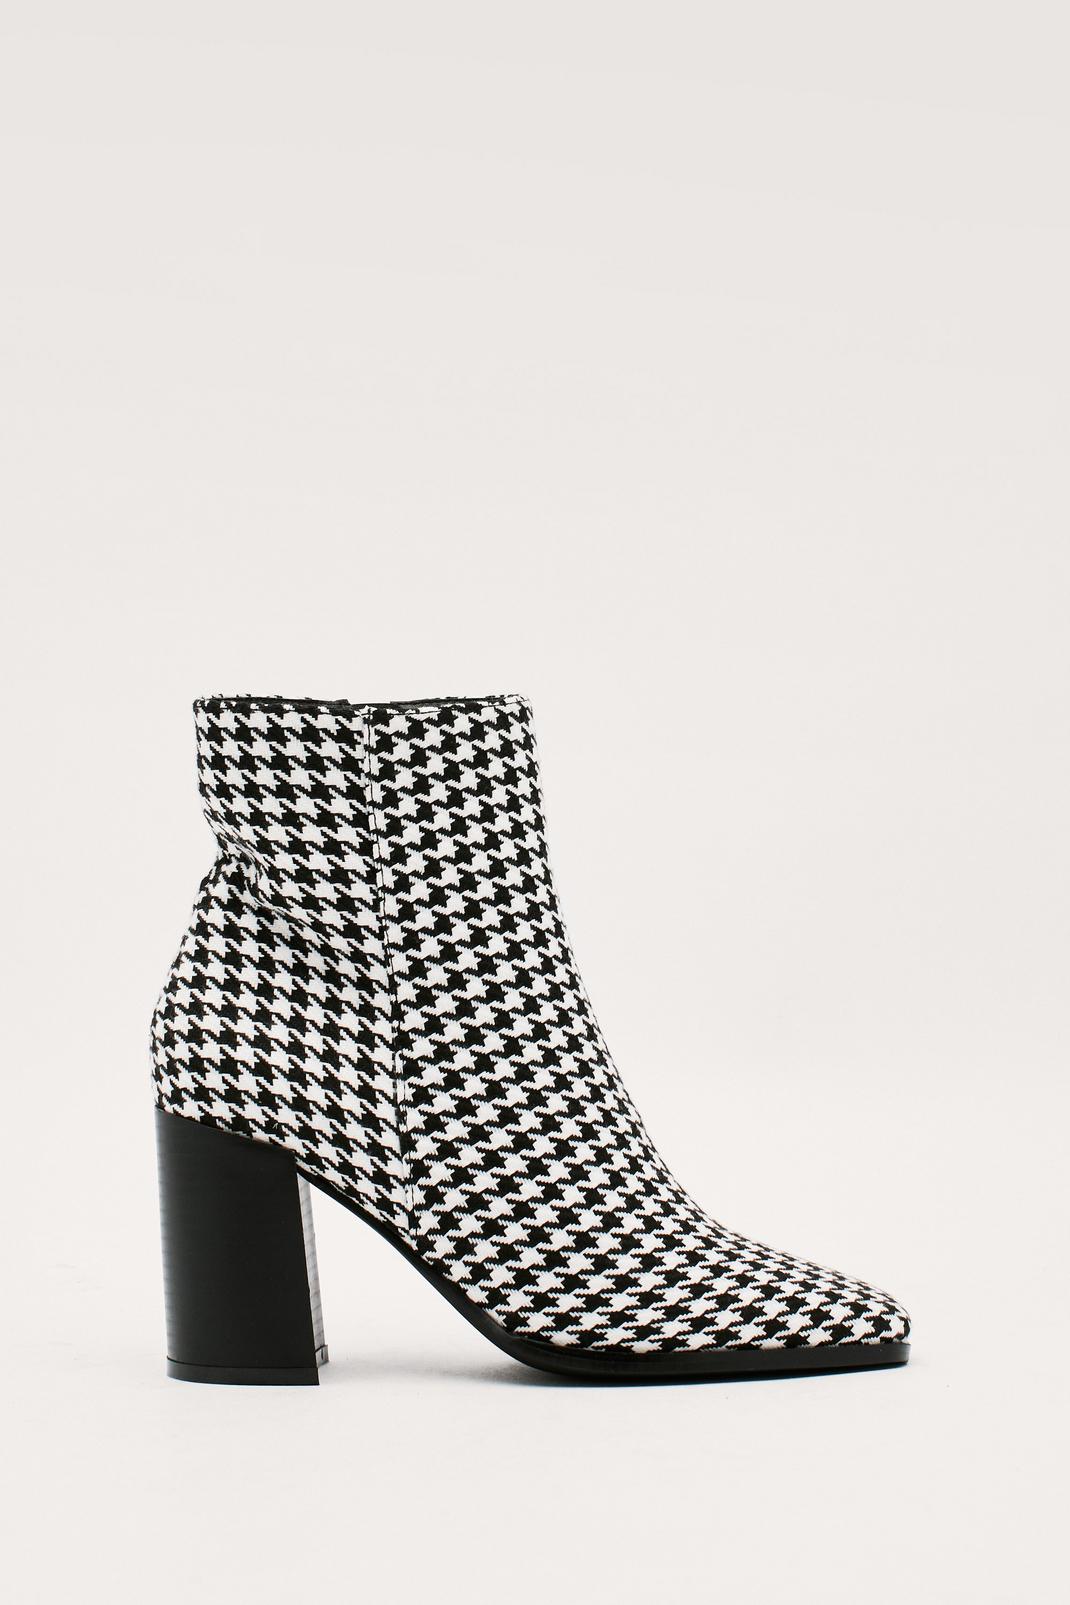 839 Houndstooth Square Toe Ankle Boots image number 1